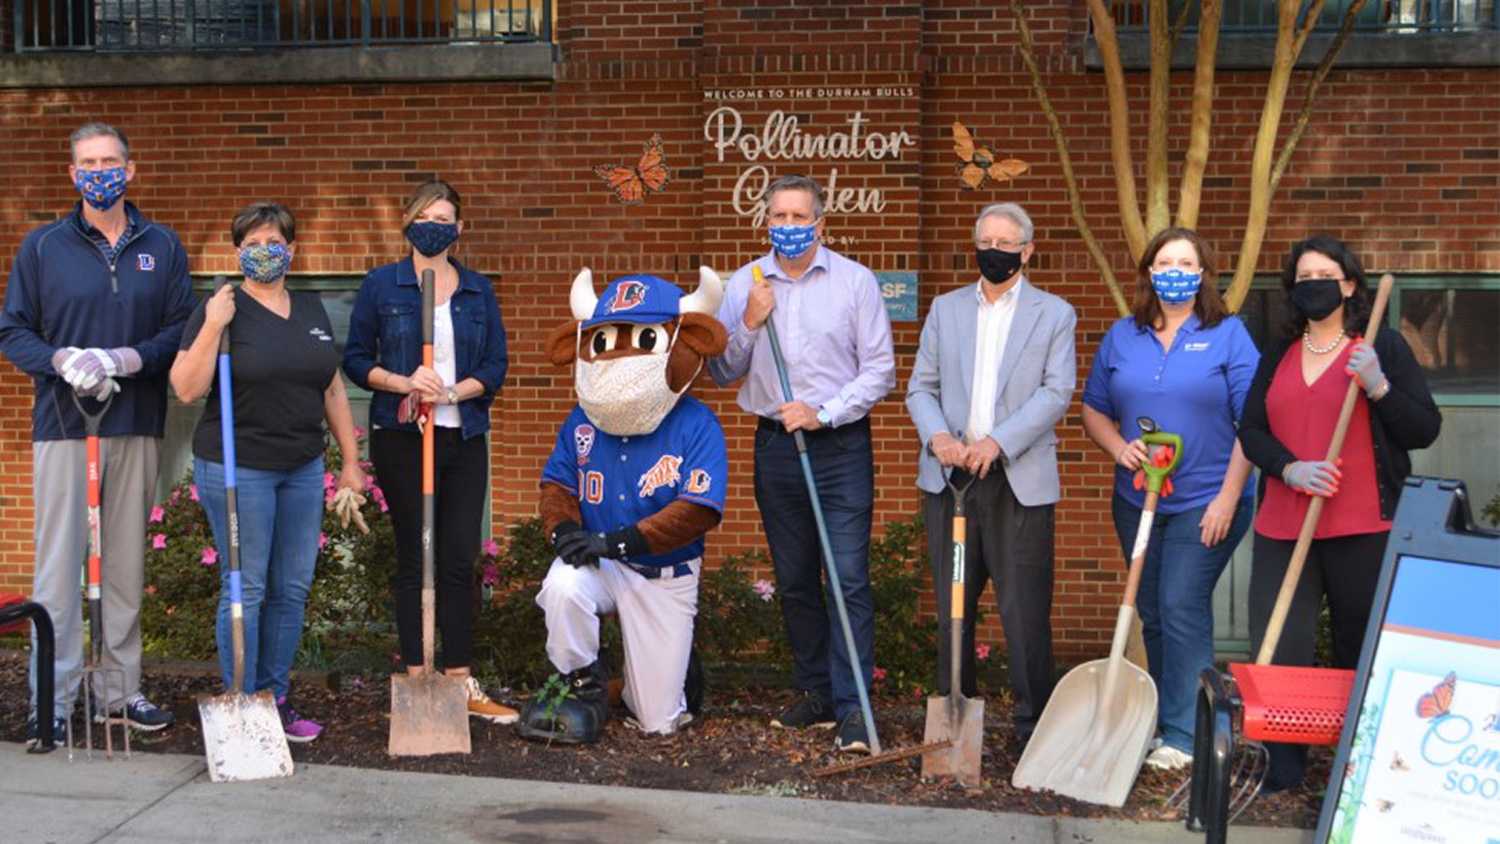 Wolfspeed employees posing with the the Durham Bulls mascot while volunteering to create a Pollinator Garden